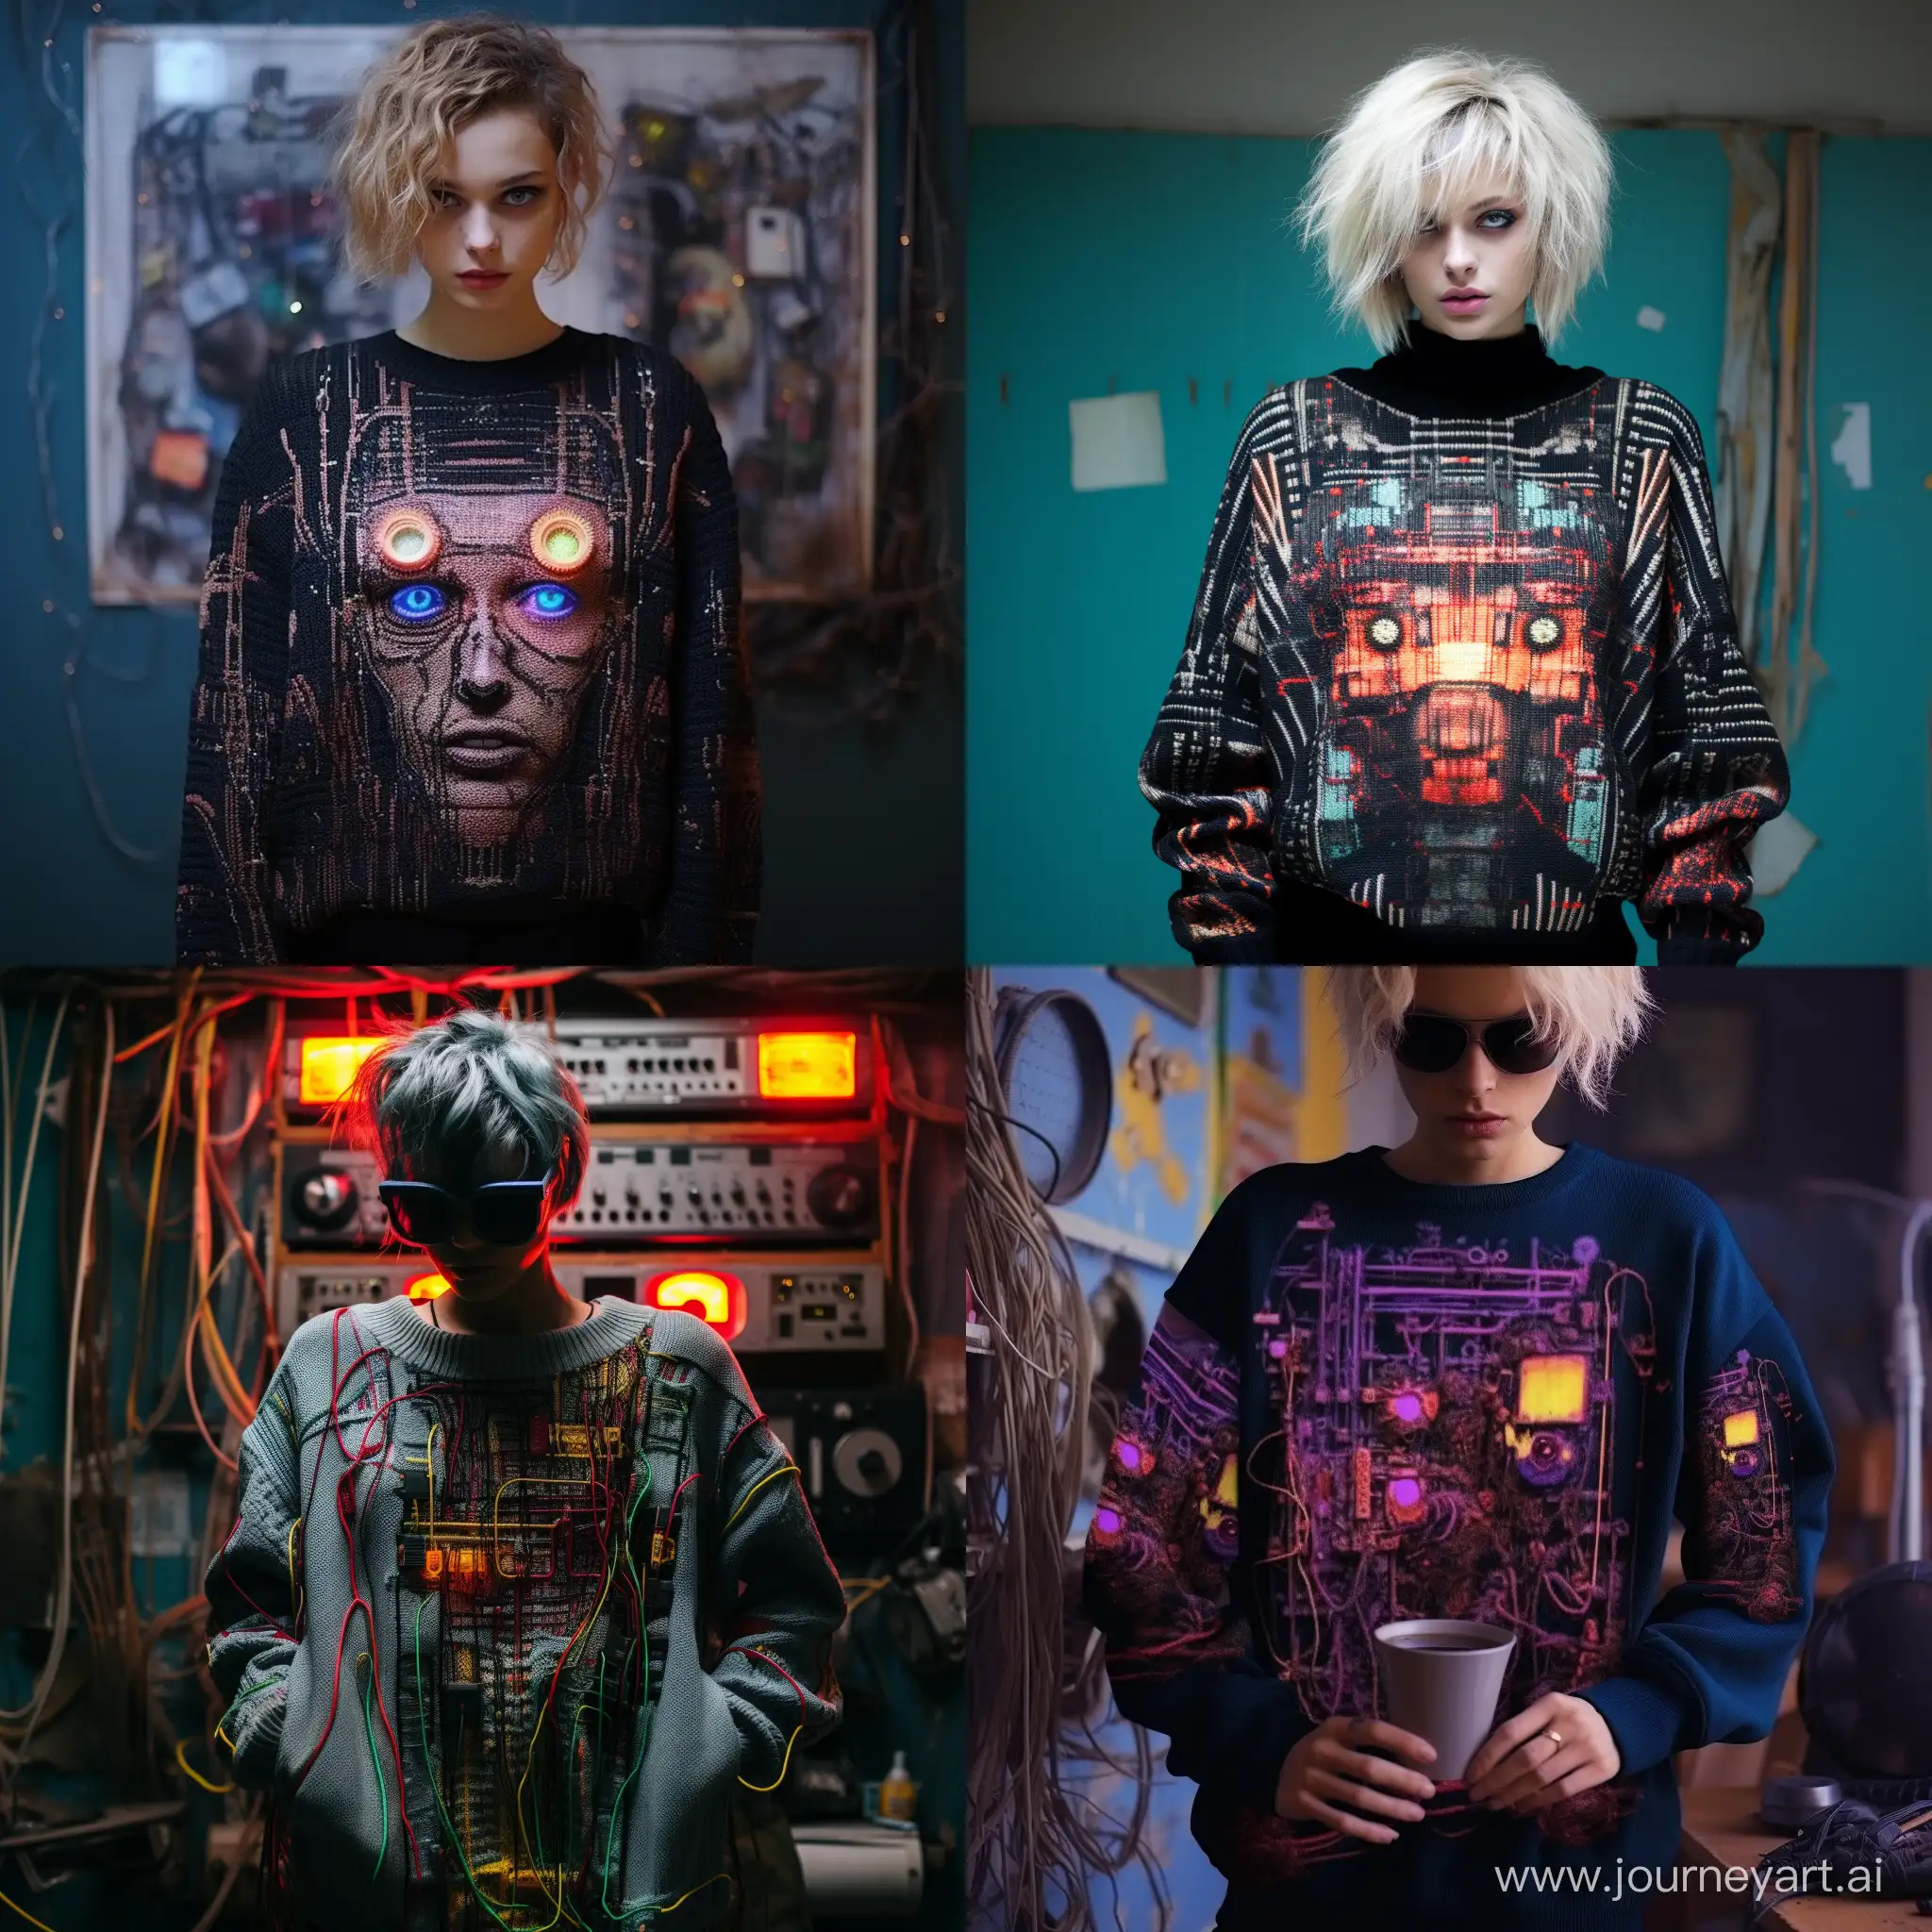 Dominating-Cyberpunk-Scene-Oversize-Knitted-Sweater-with-ComputerControlled-World